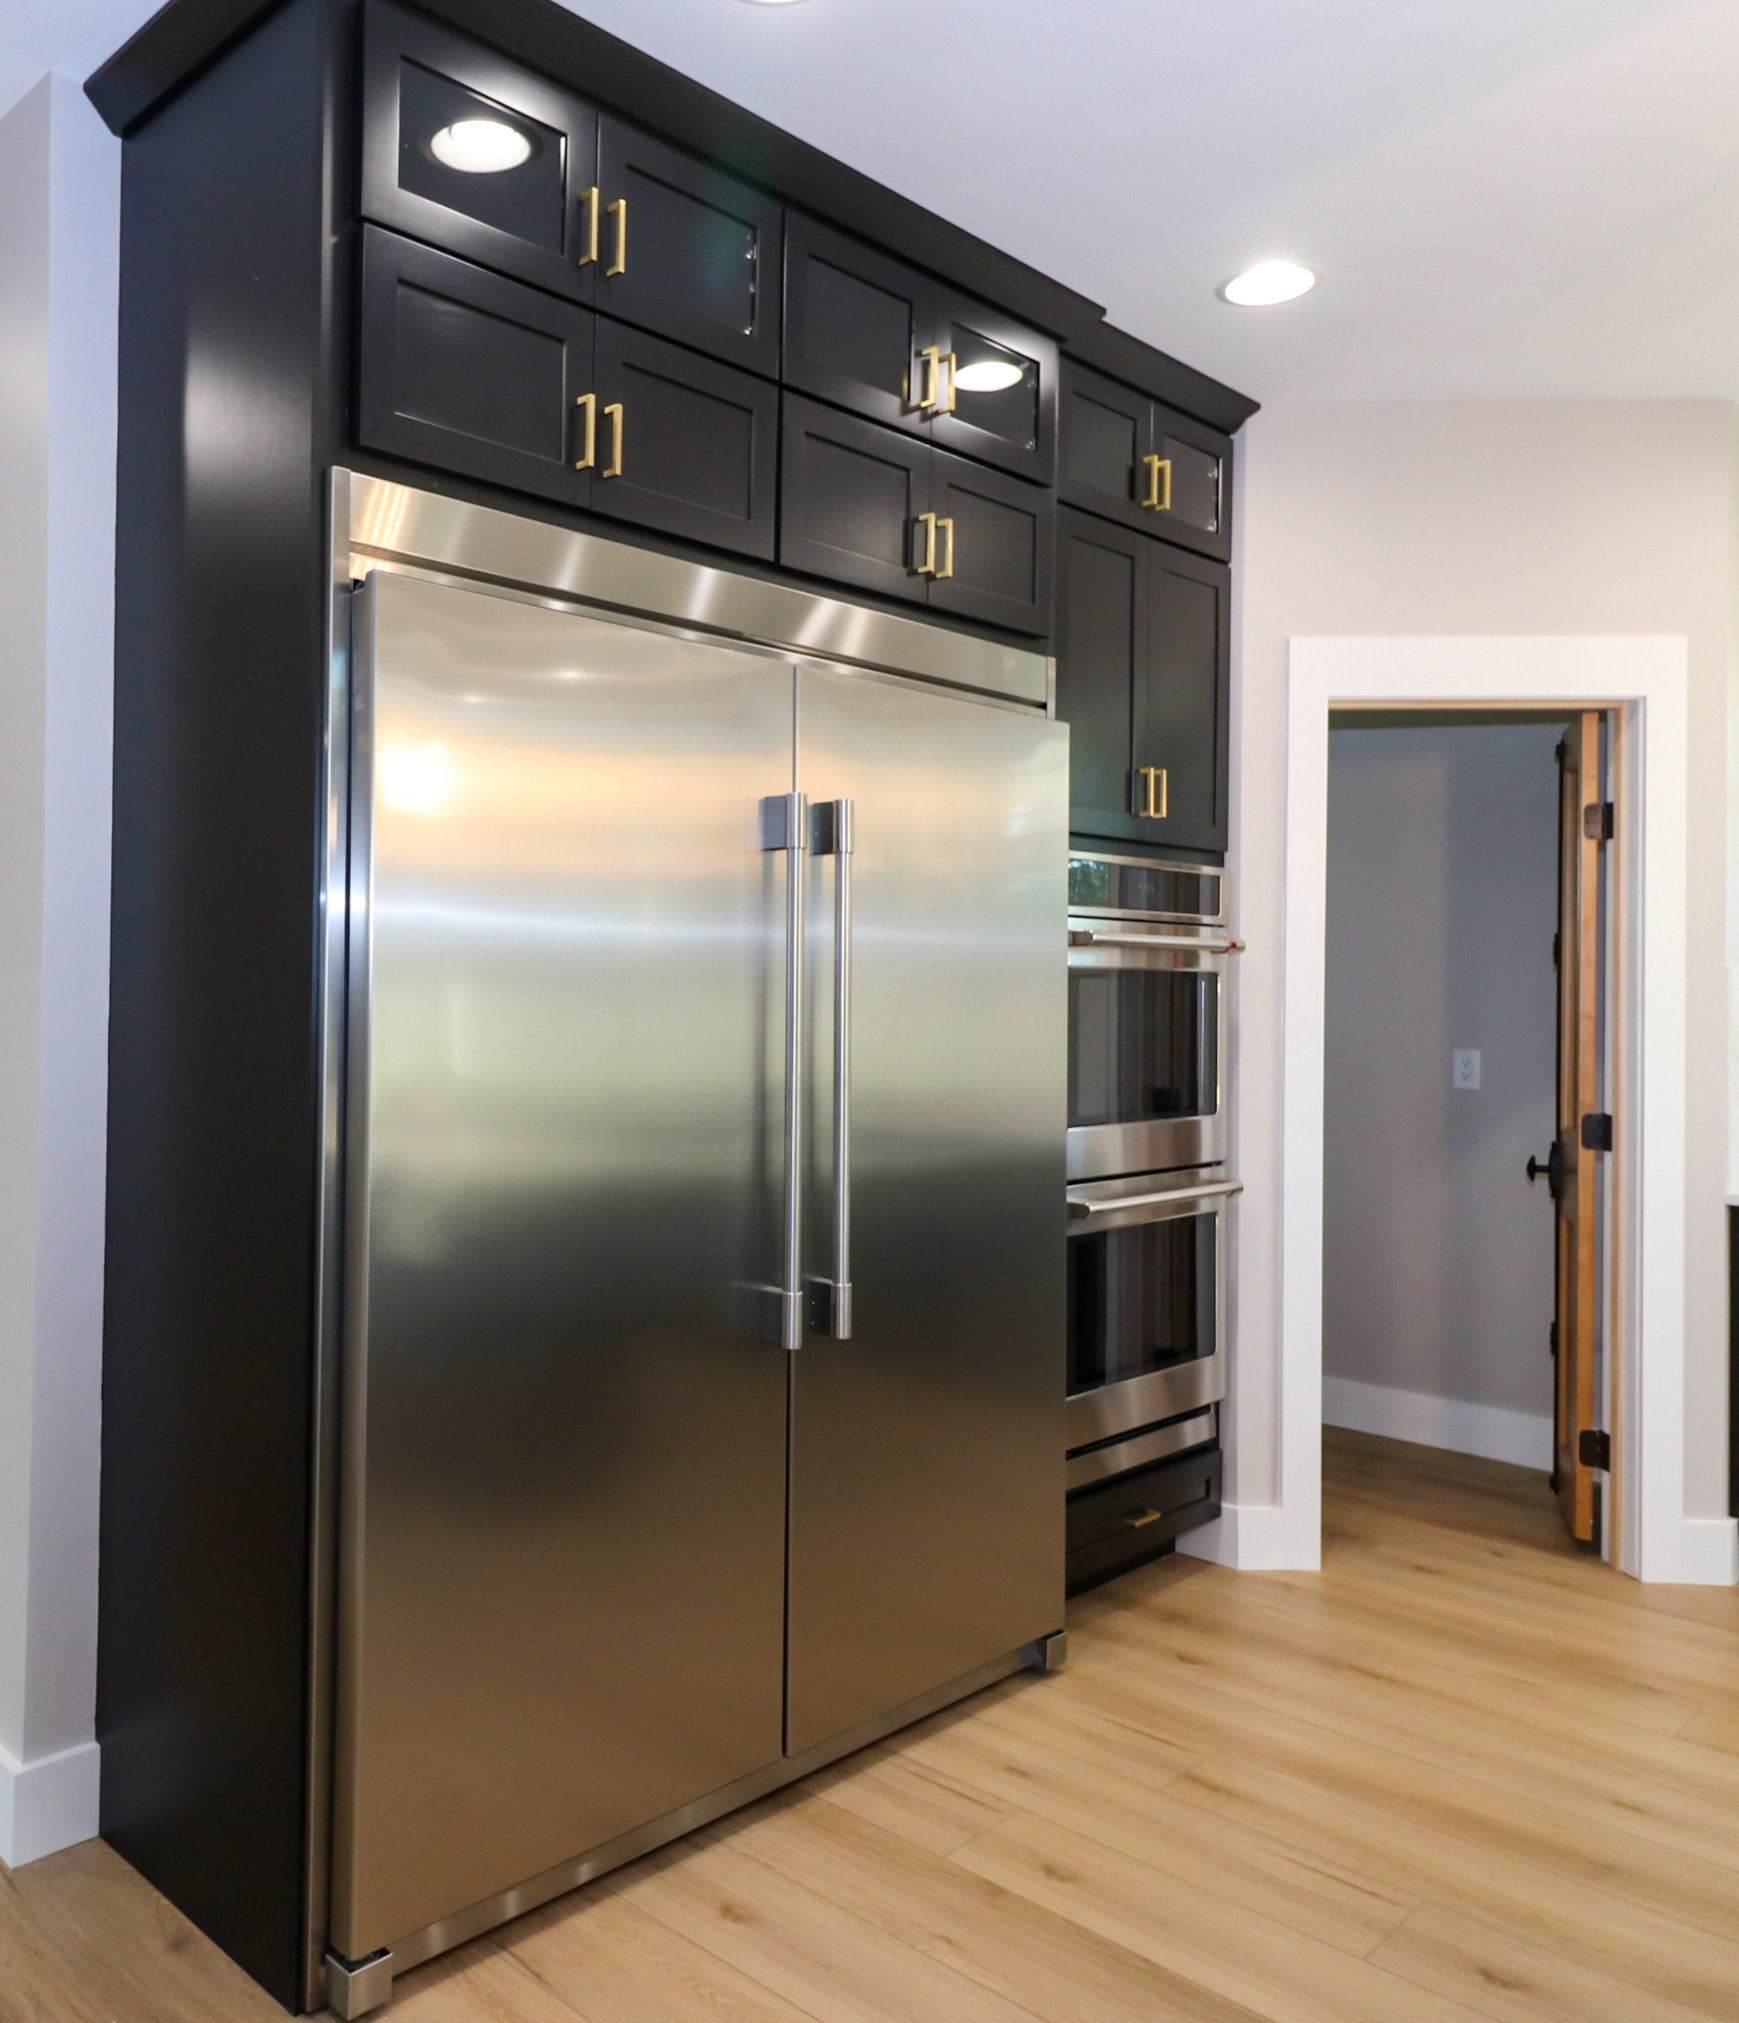 Double Refrigerator, Seely Homes